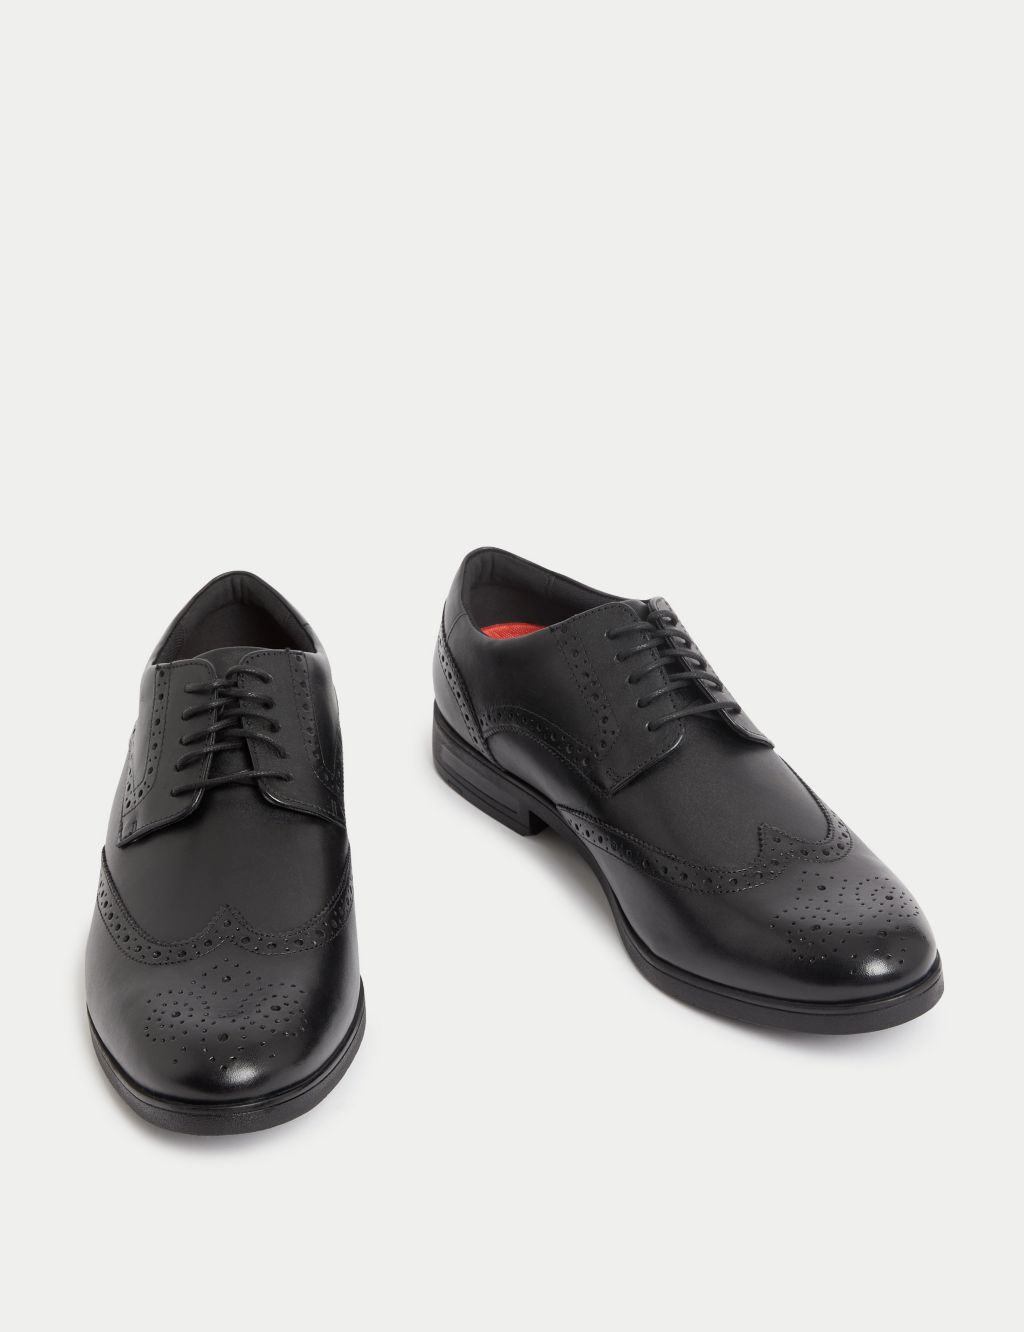 Wide Fit Airflex™ Leather Brogues image 2